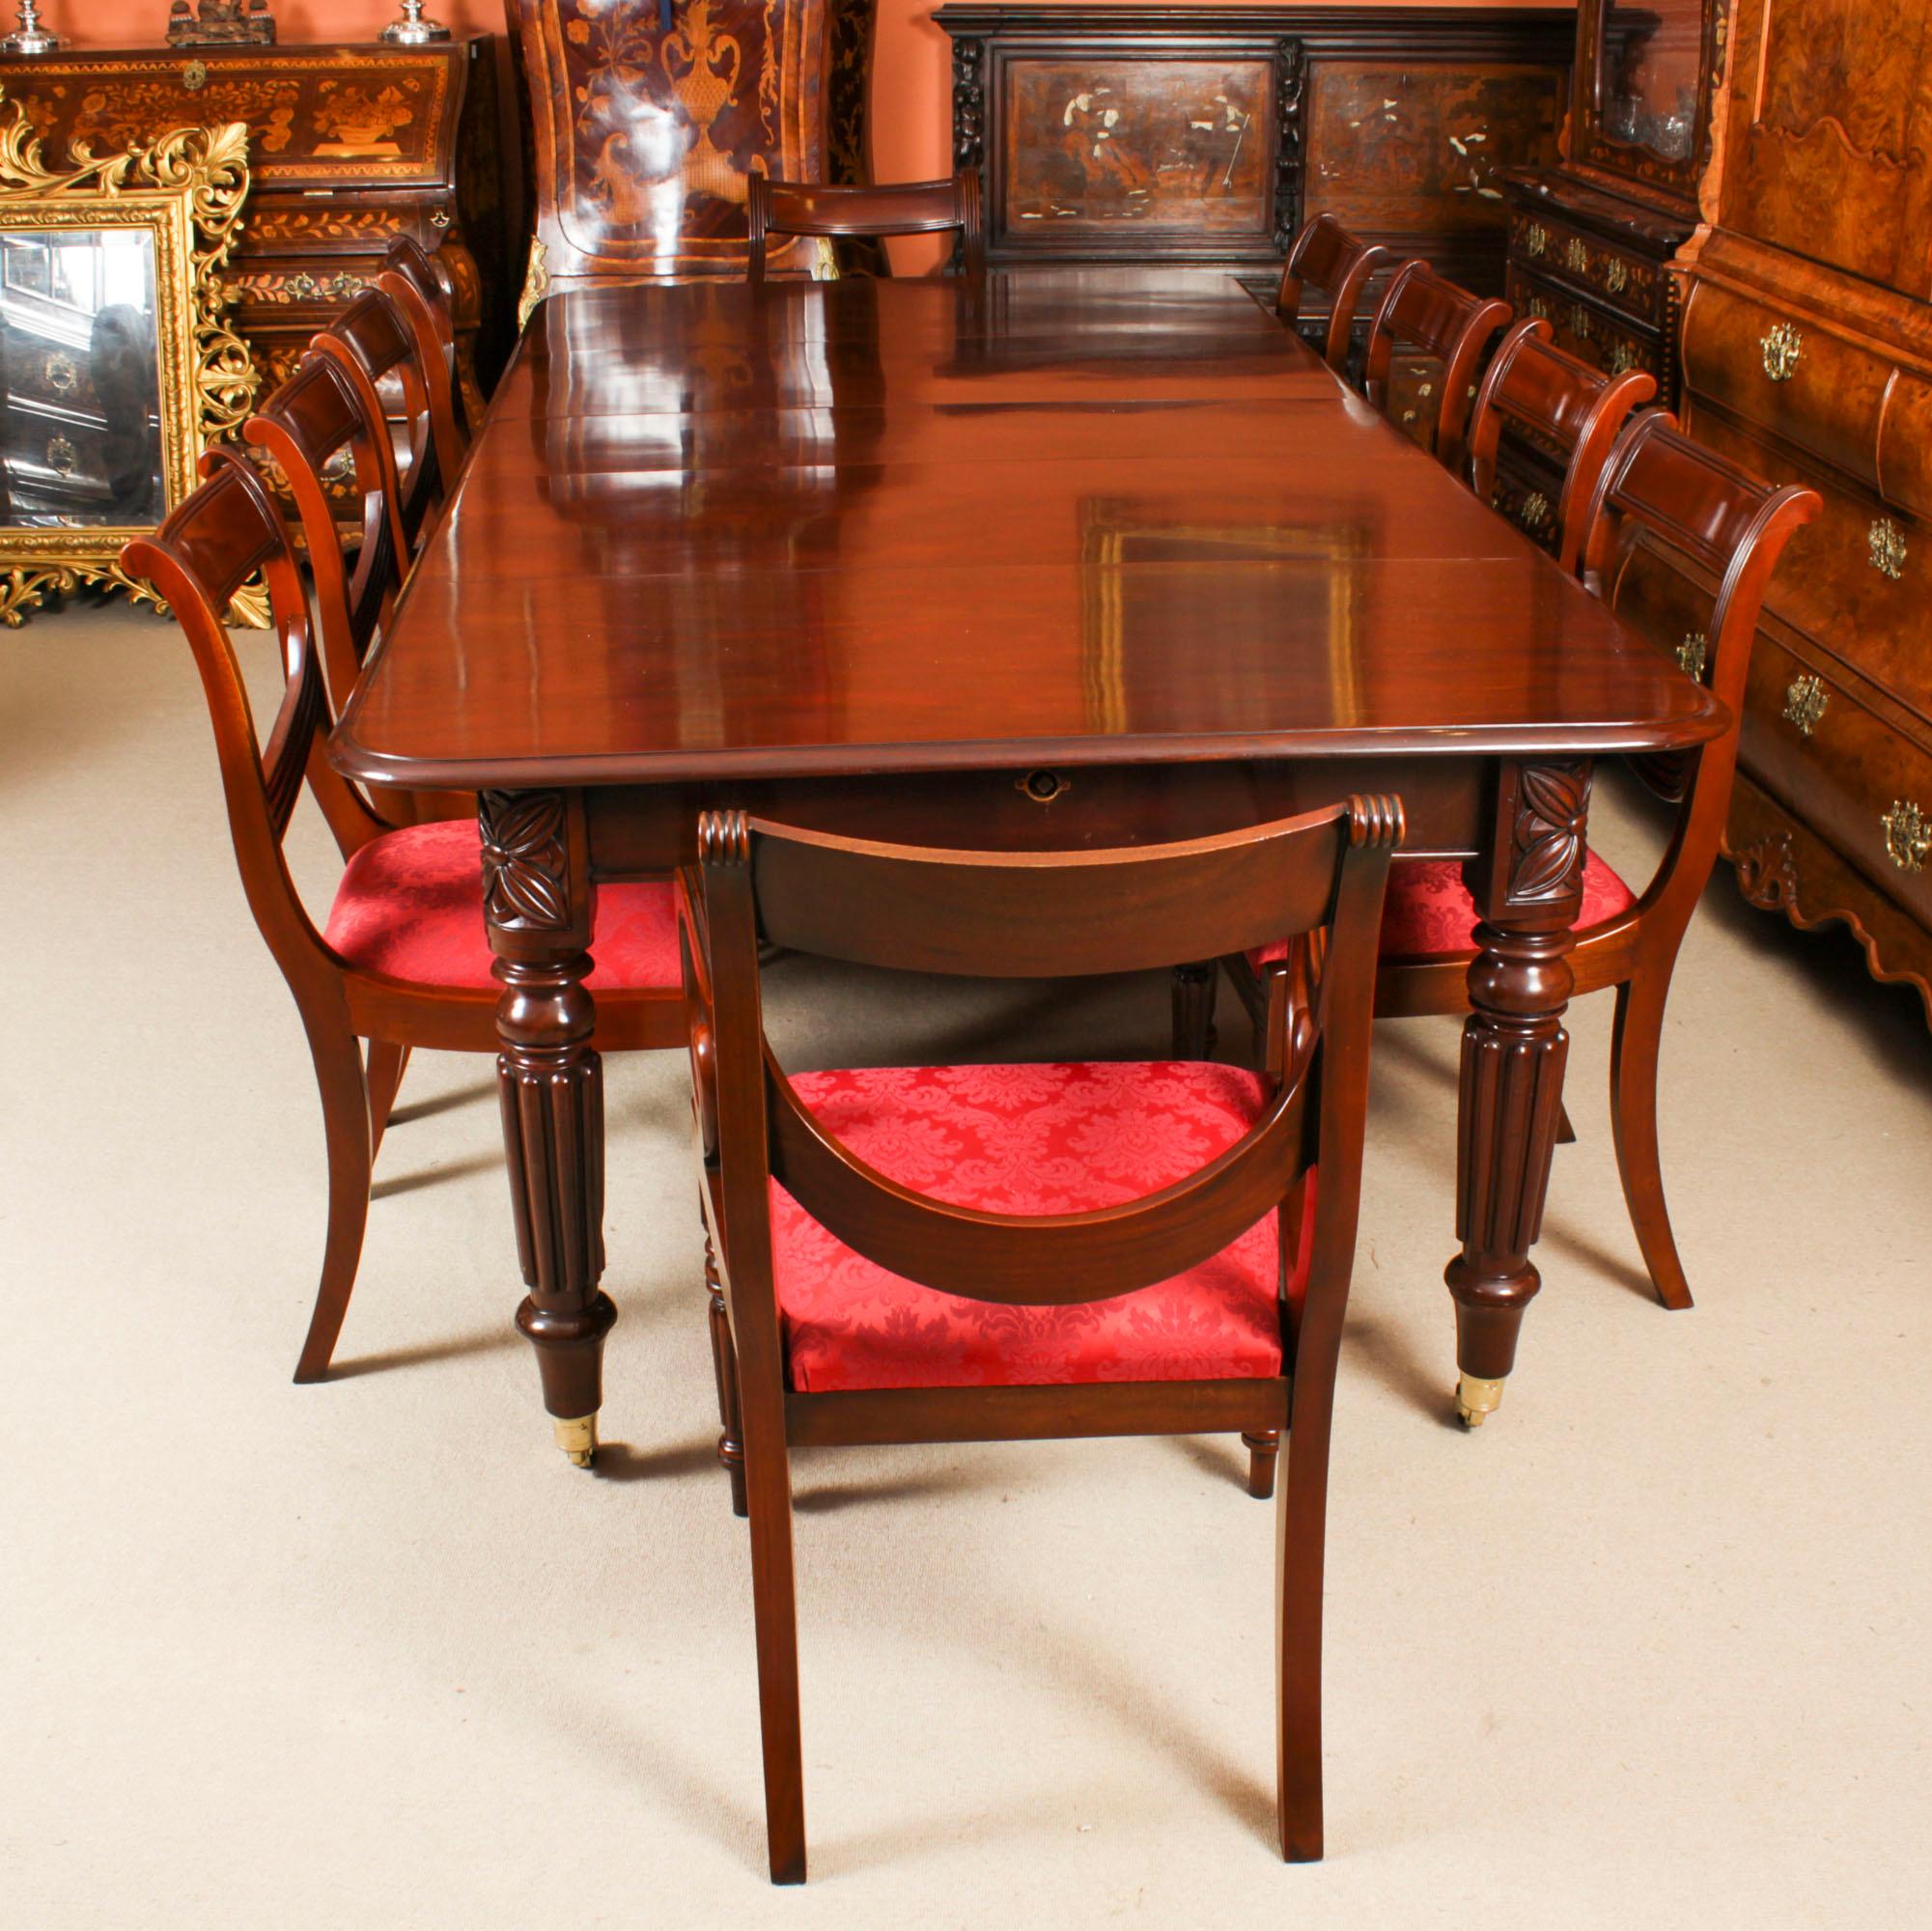 English Antique Regency Flame Mahogany Extending Dining Table, 19th Century